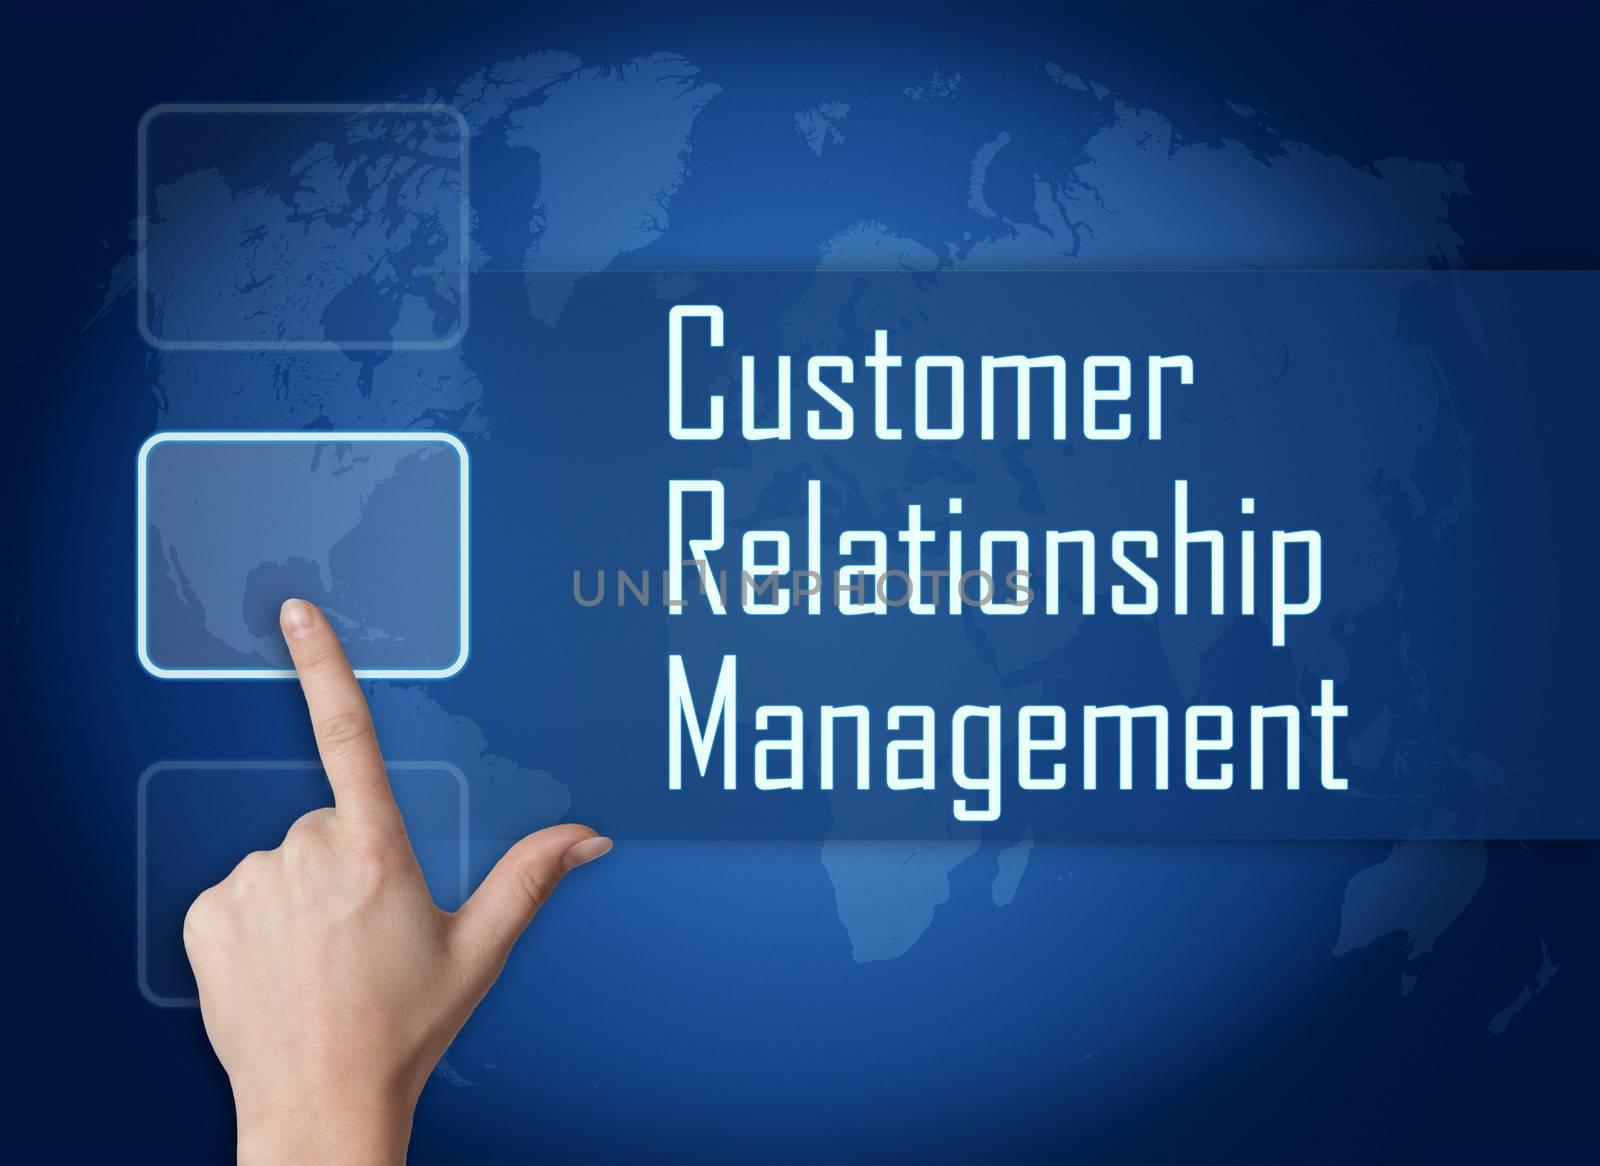 Customer Relationship Management concept with interface and world map on blue background